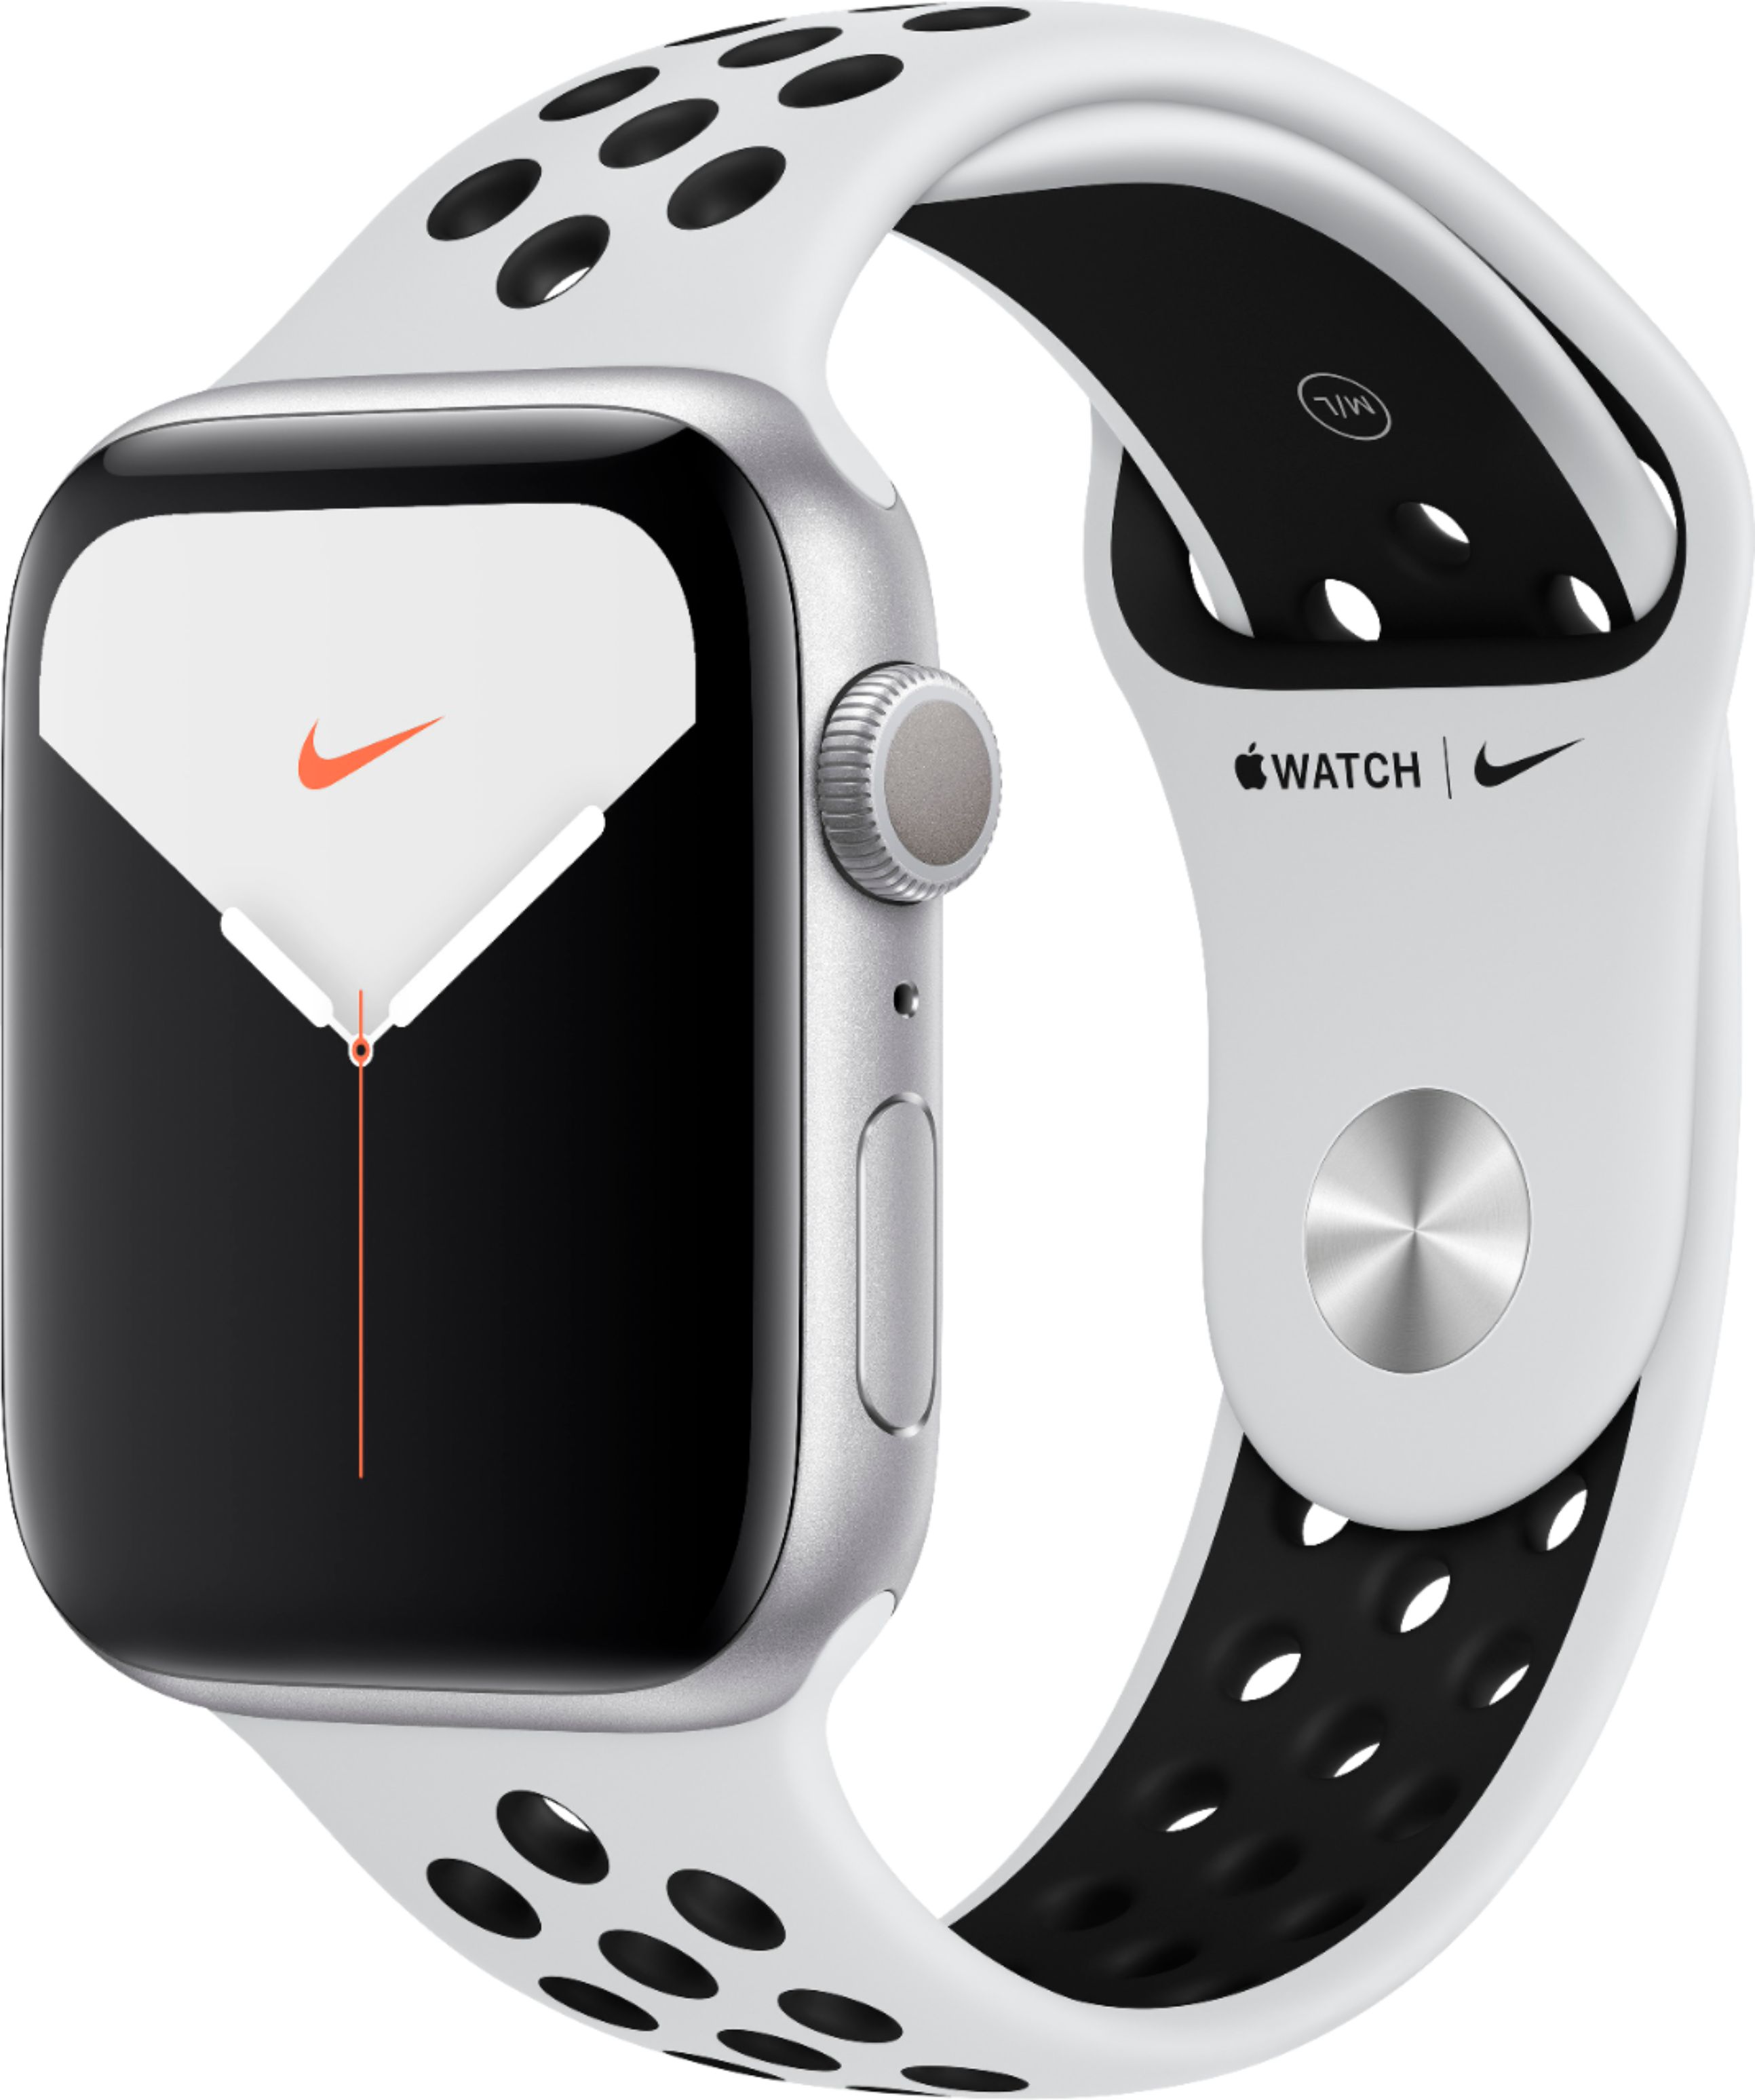 nike series 5 apple watch review